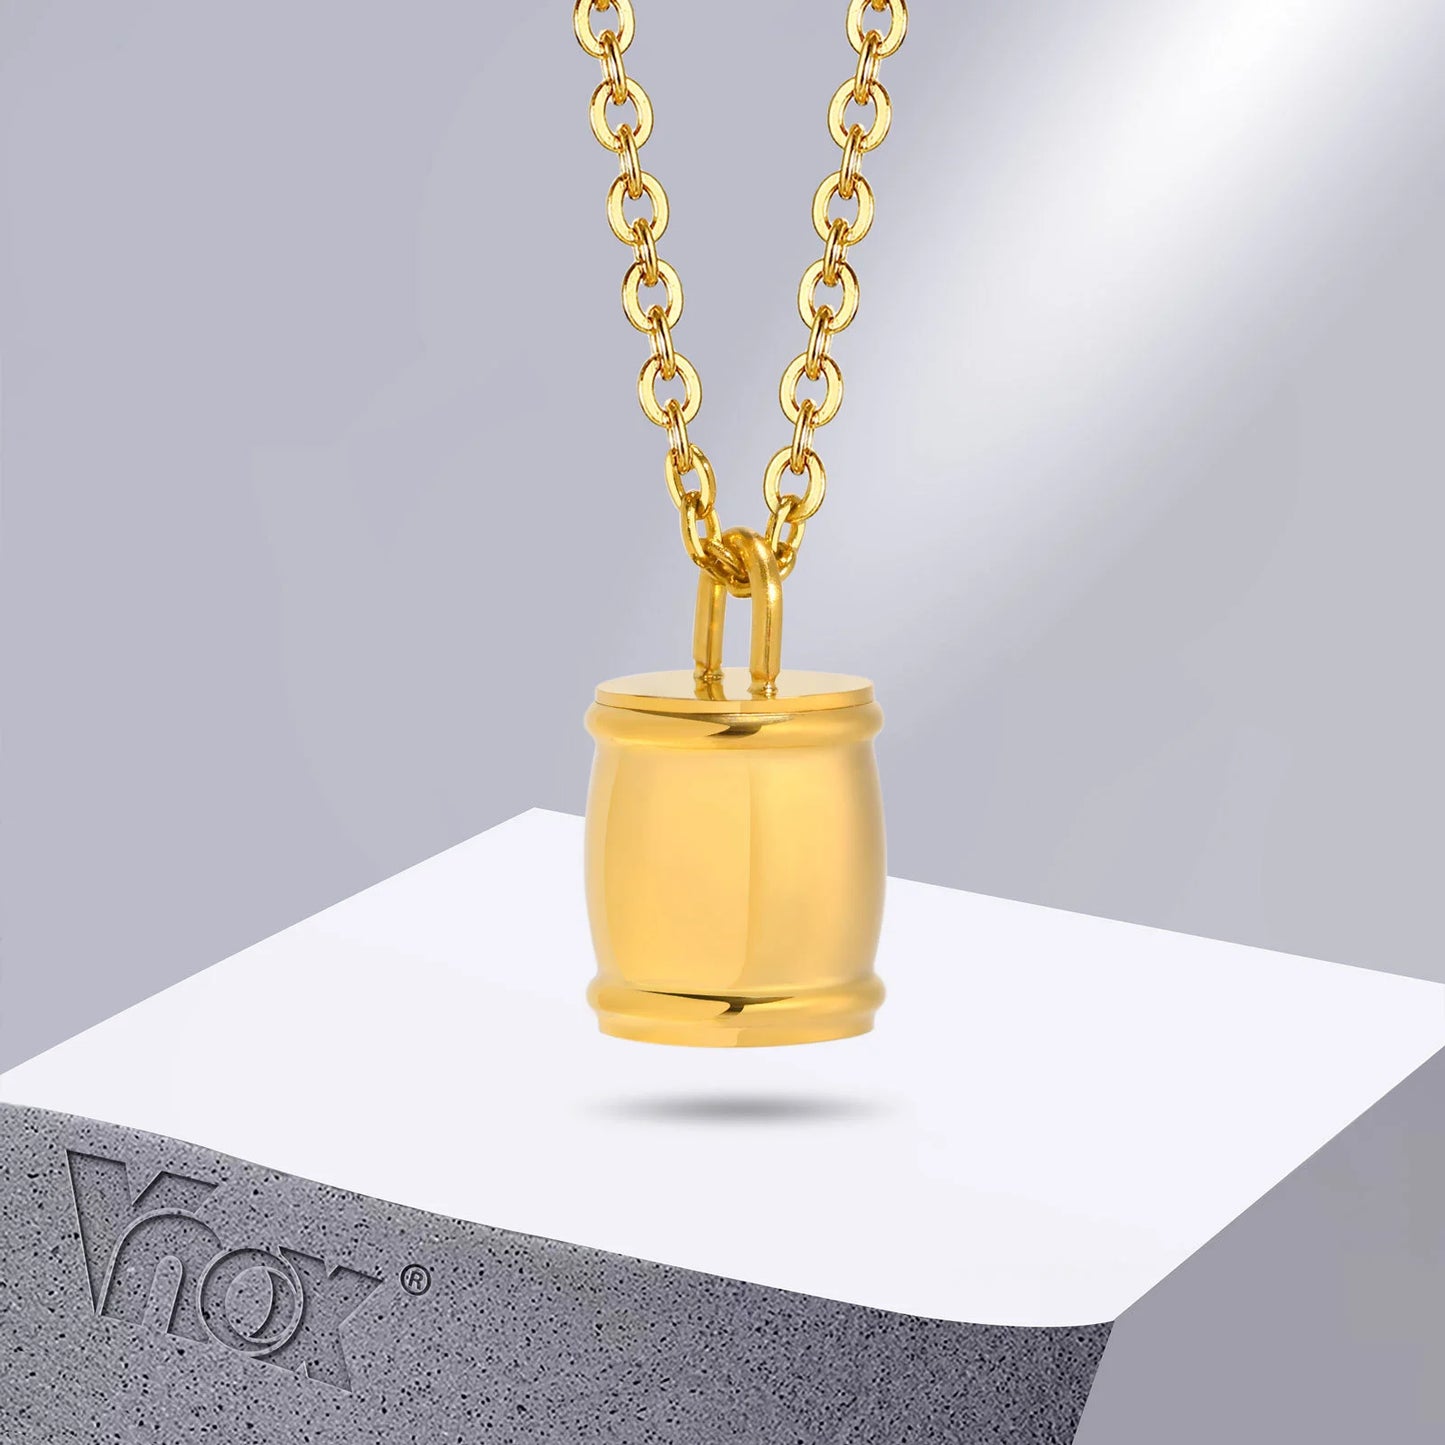 Vnox - Hollow Jar Cremation Jewelry Keepsake Pendant For Ashes